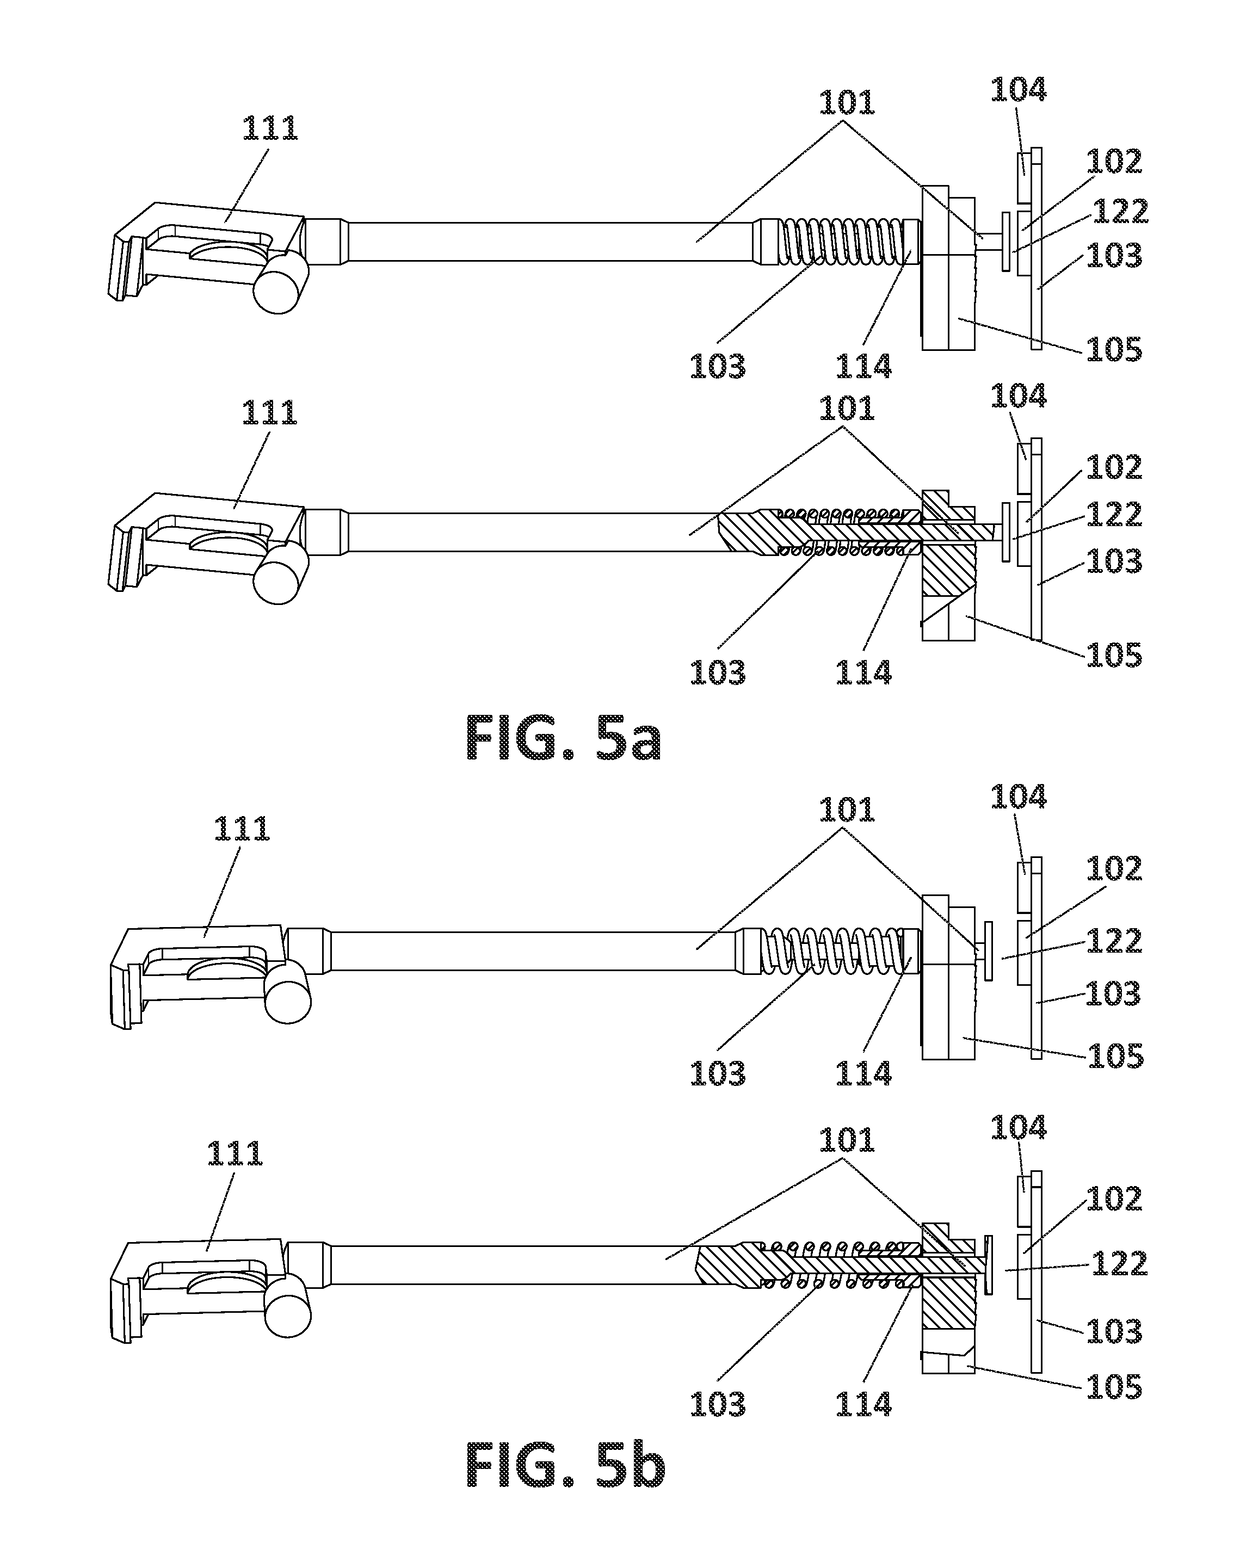 Cartridge-in-chamber detection system for firearms